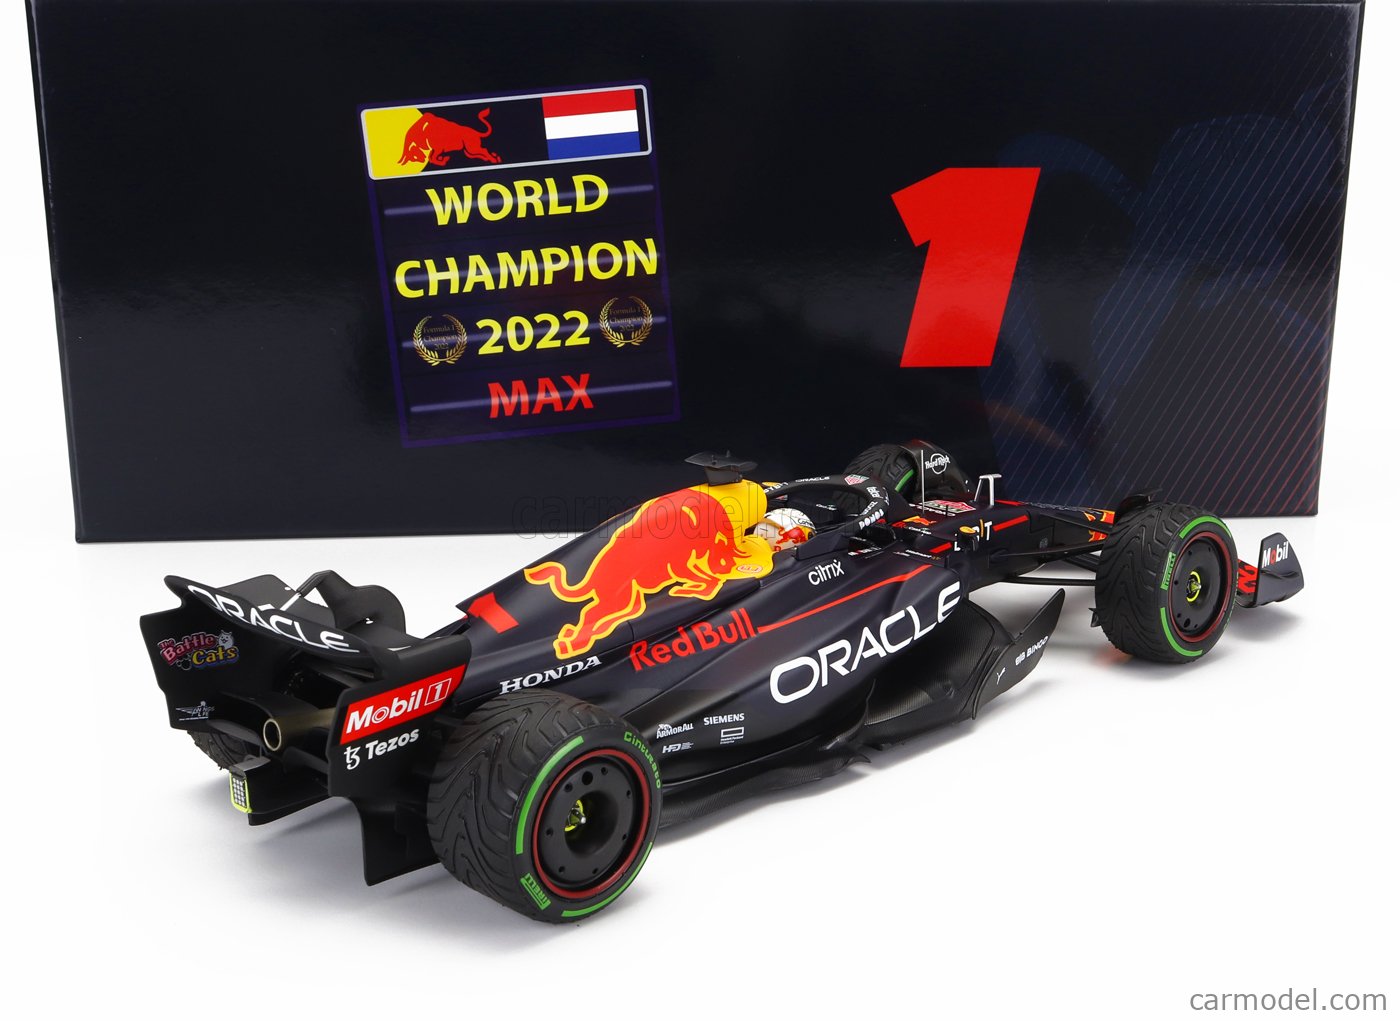 Piquadro - Red Bull Racing drivers Max Verstappen and